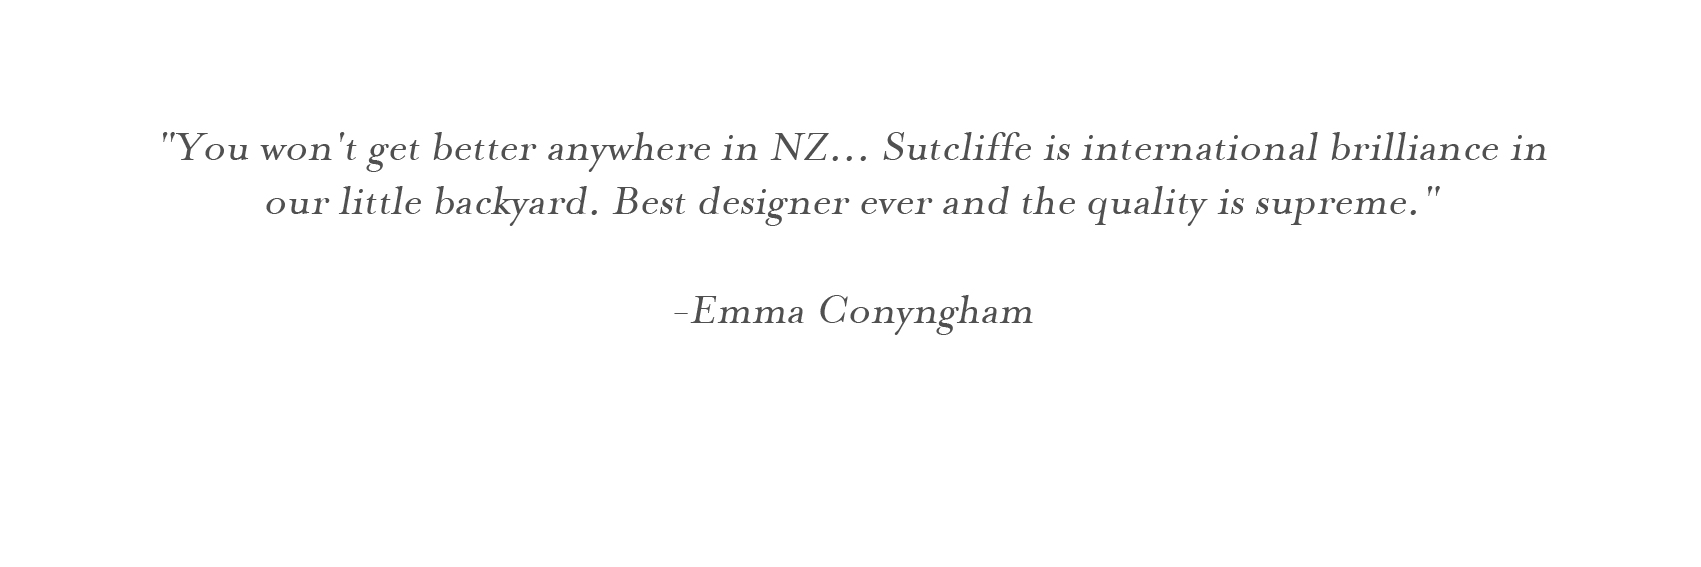    "You won't get better anywhere in NZ... Sutcliffe is international brilliance in our little backyard. Best designer ever and the quality is supreme."  -Emma Conyngham   